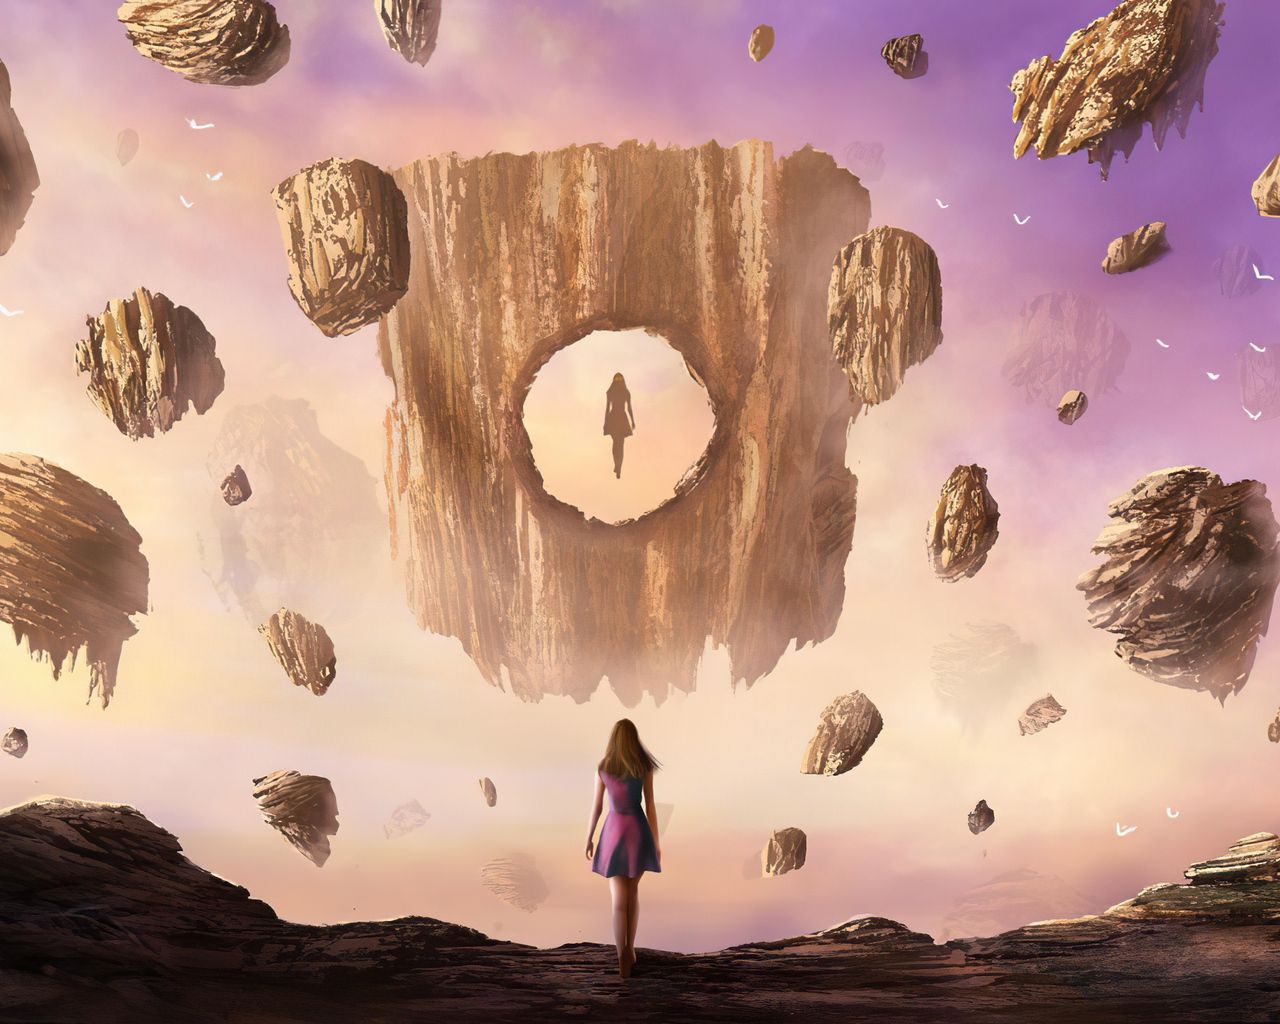 A woman standing in a rocky desert with floating rocks and a portal to another world. The image has a dreamy, surreal aesthetic. - 1280x1024